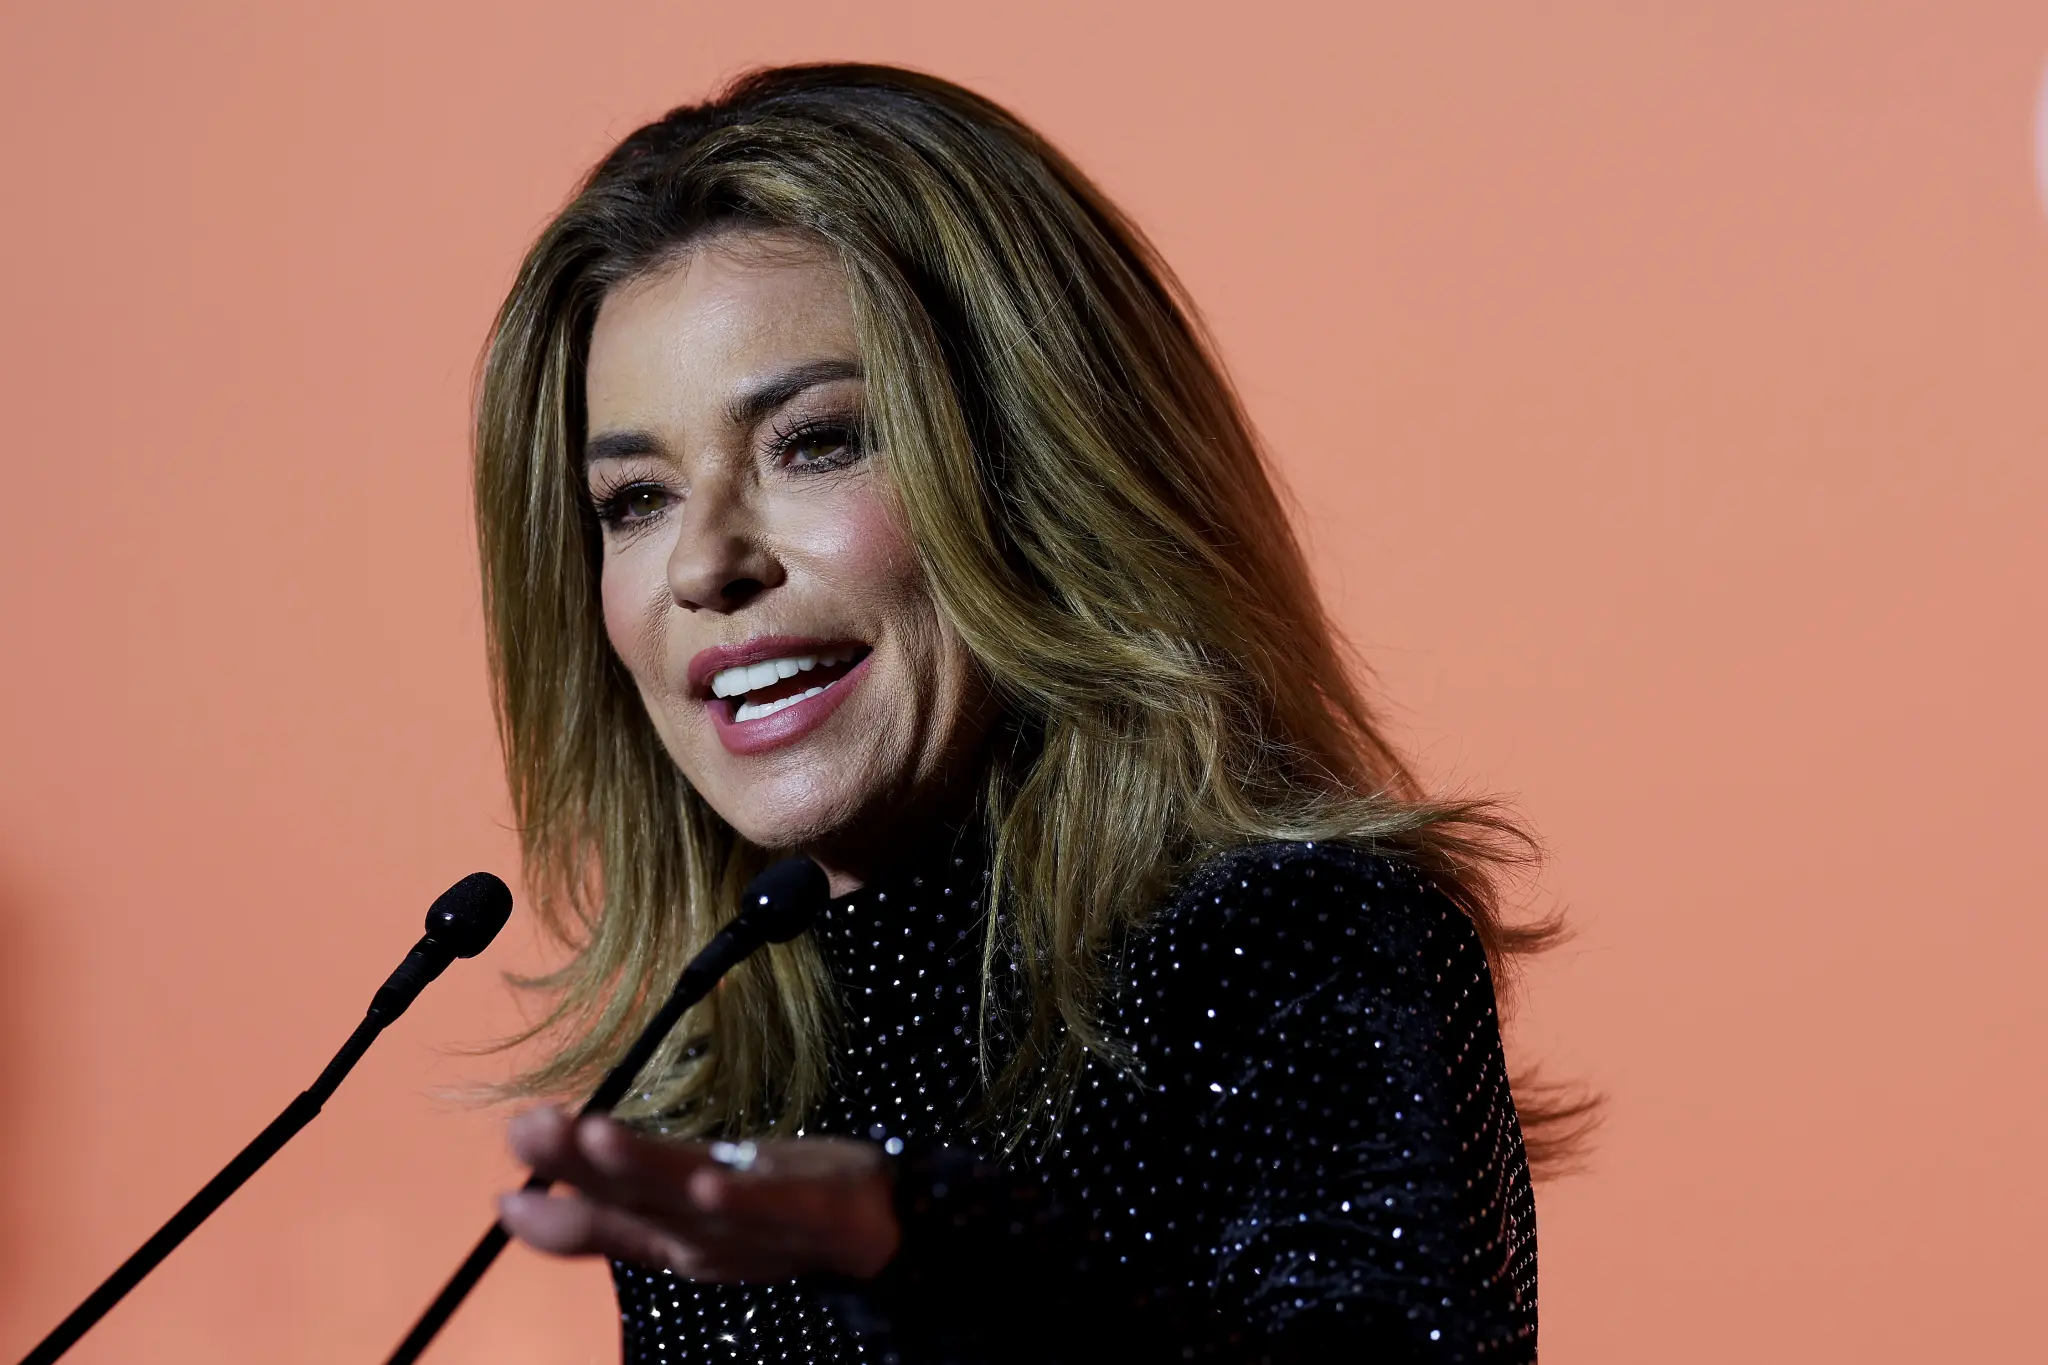 Shania Twain on Forgiveness: Understanding Over Resentment